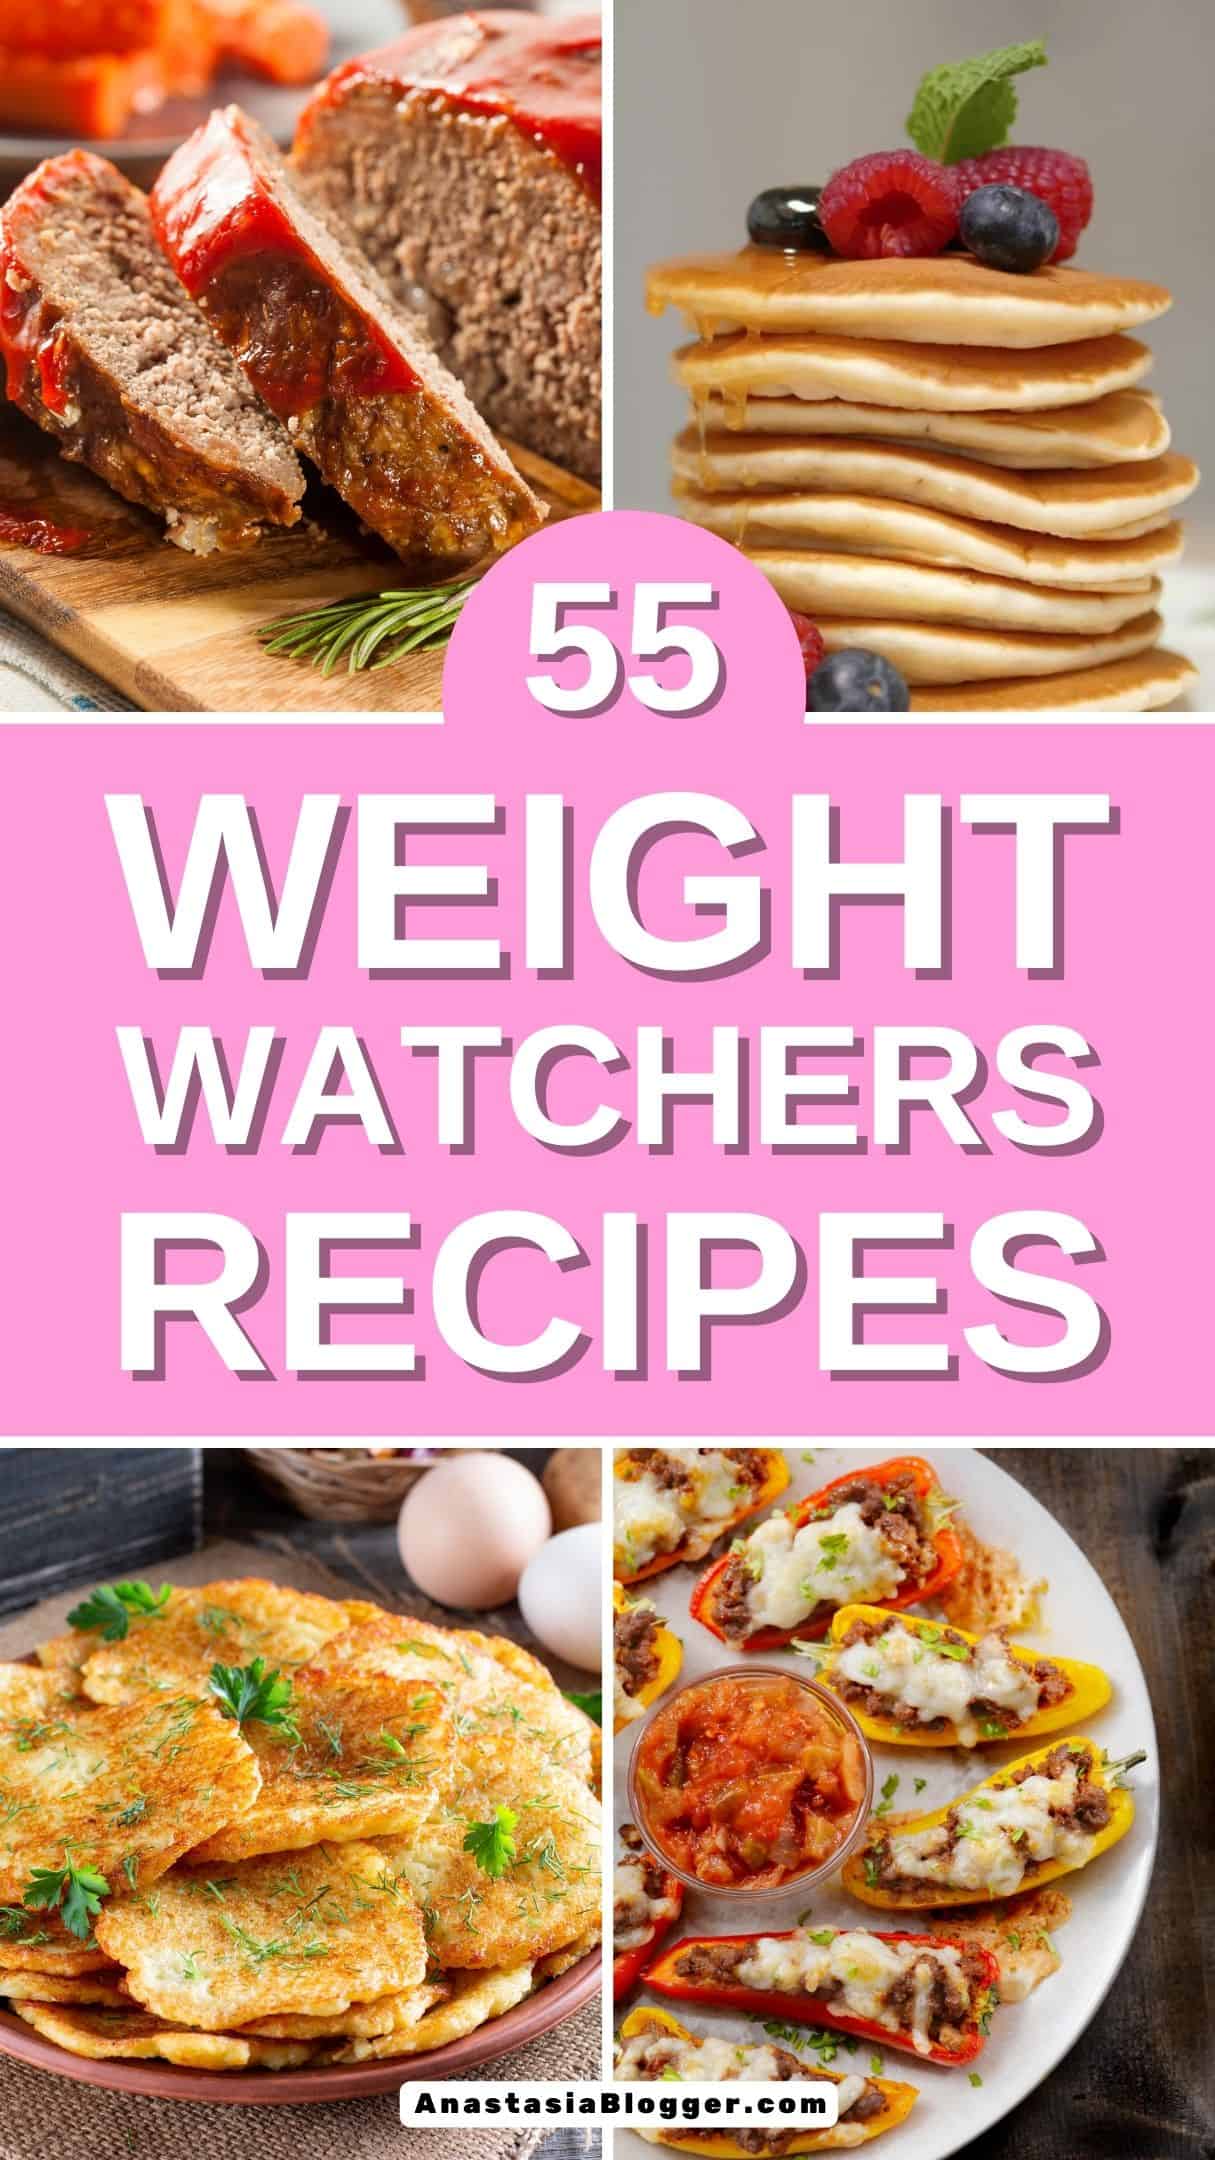  WEIGHT WATCHERS RECIPES DINNER IDEAS WITH SMARTPOINTS